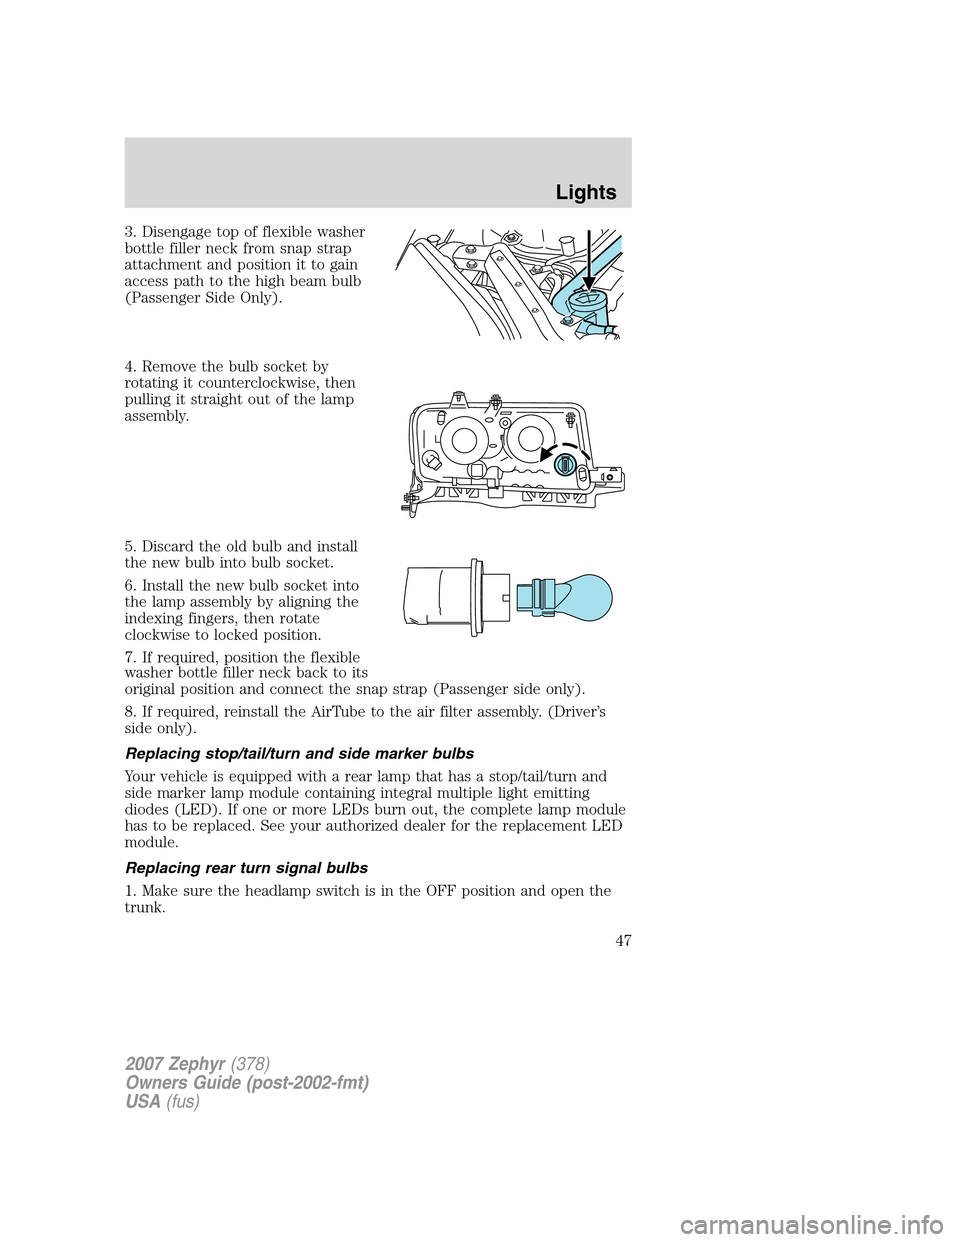 LINCOLN MKZ 2007 Service Manual 3. Disengage top of flexible washer
bottle filler neck from snap strap
attachment and position it to gain
access path to the high beam bulb
(Passenger Side Only).
4. Remove the bulb socket by
rotating